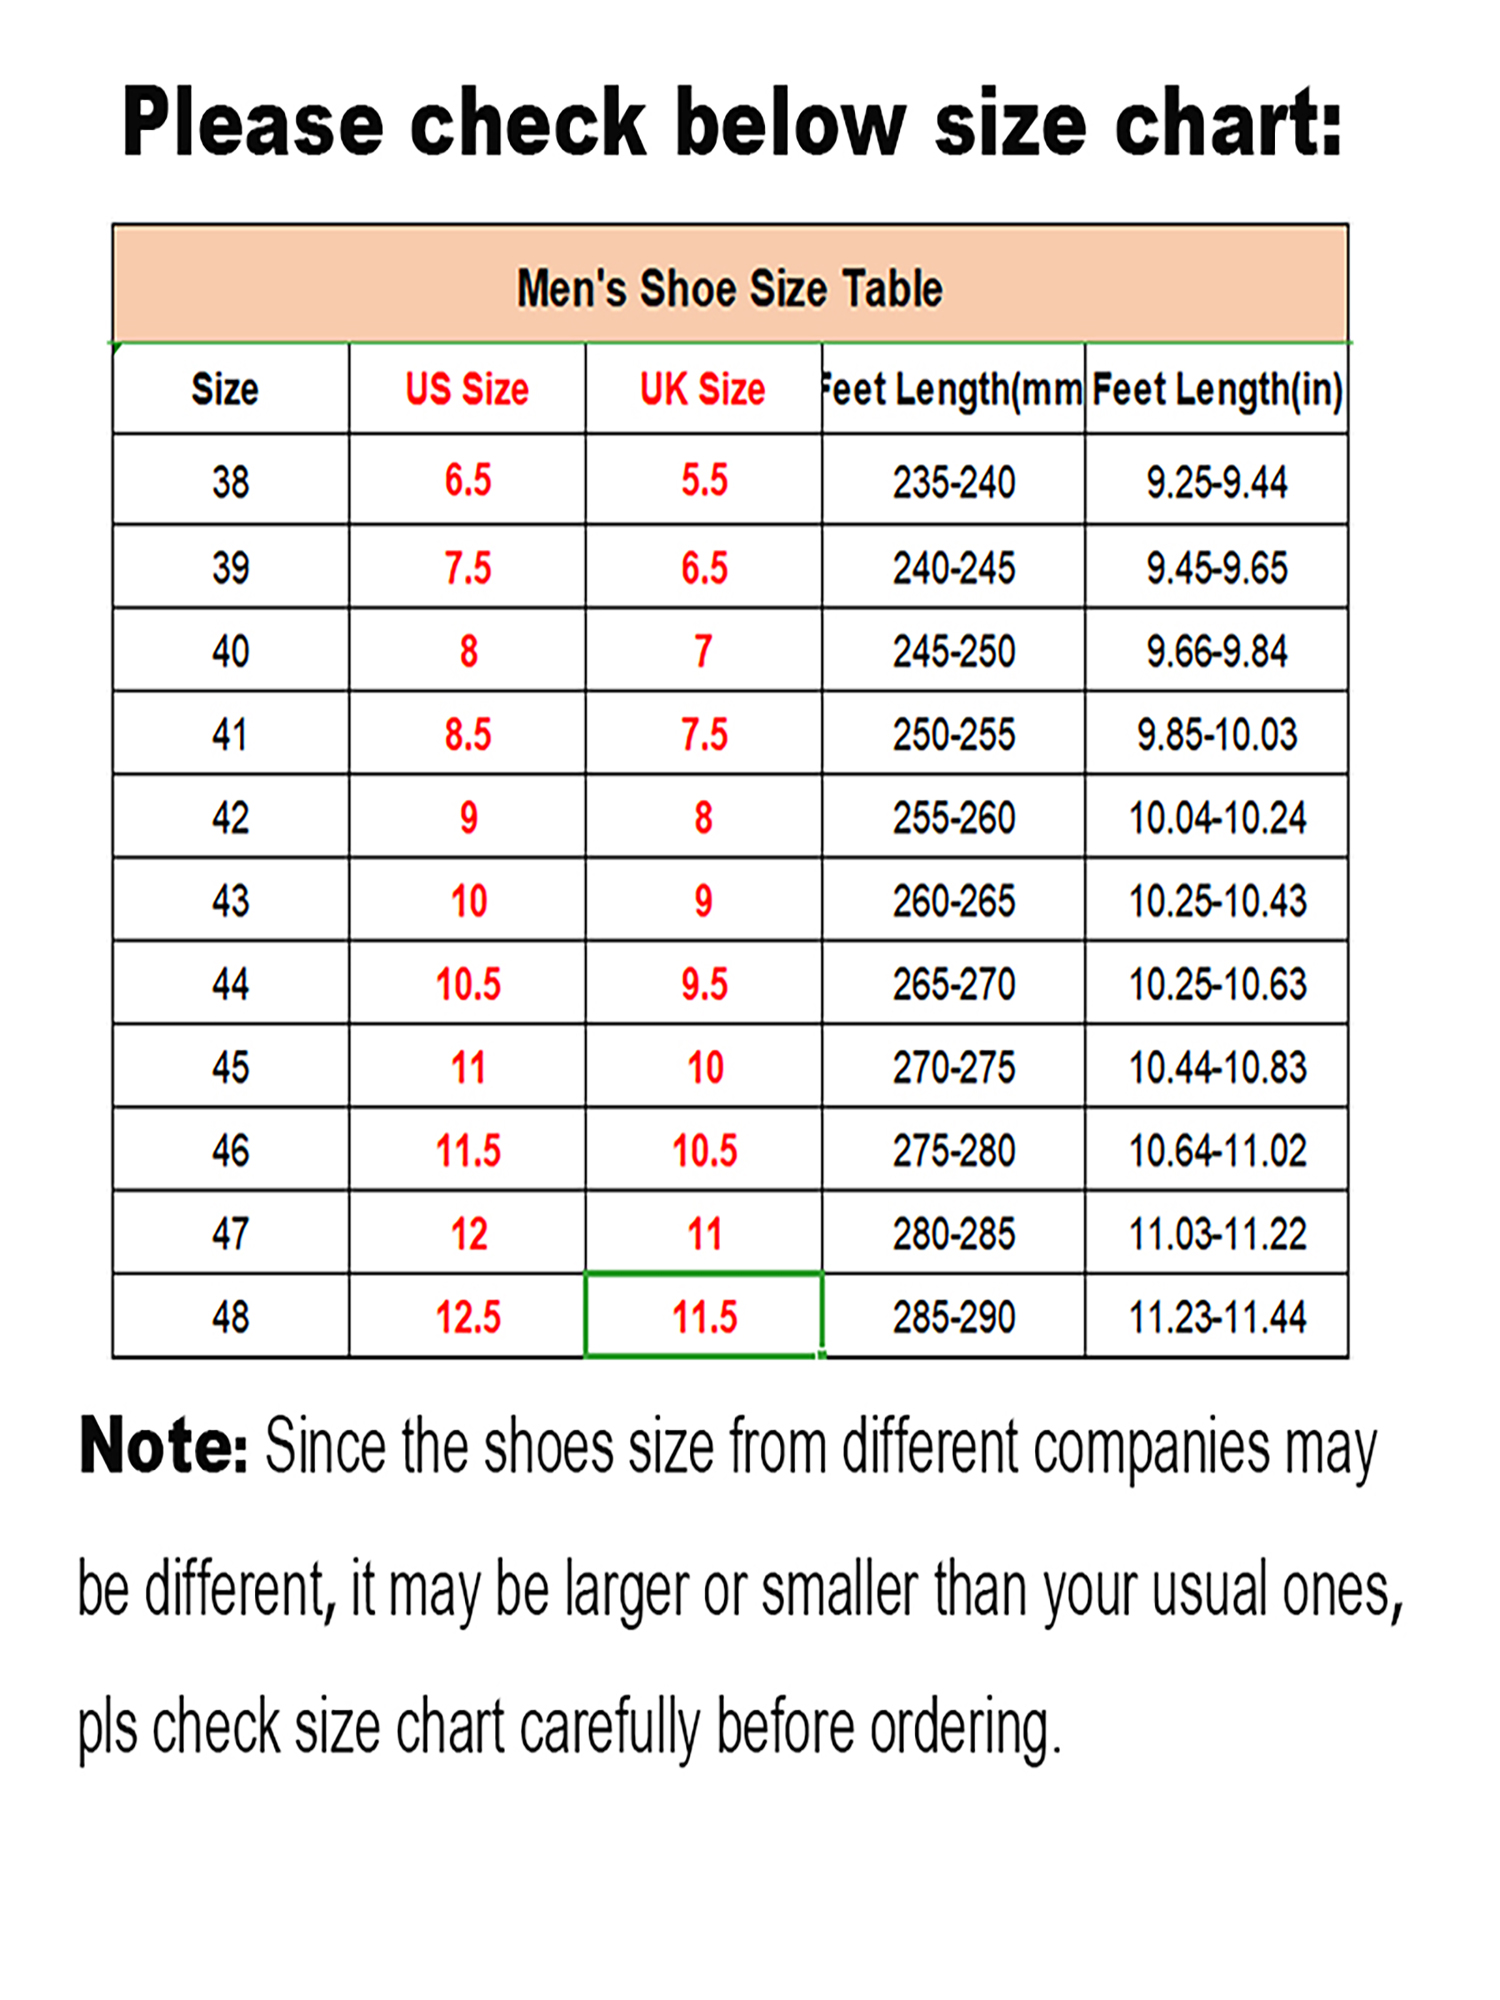 Avamo Mens Ankle Boots, Men's Casual Shoes Zipper Hand Stitching Booties Breathable Non Slip Outdoor Shoes Size 6.5-12.5 - image 2 of 5